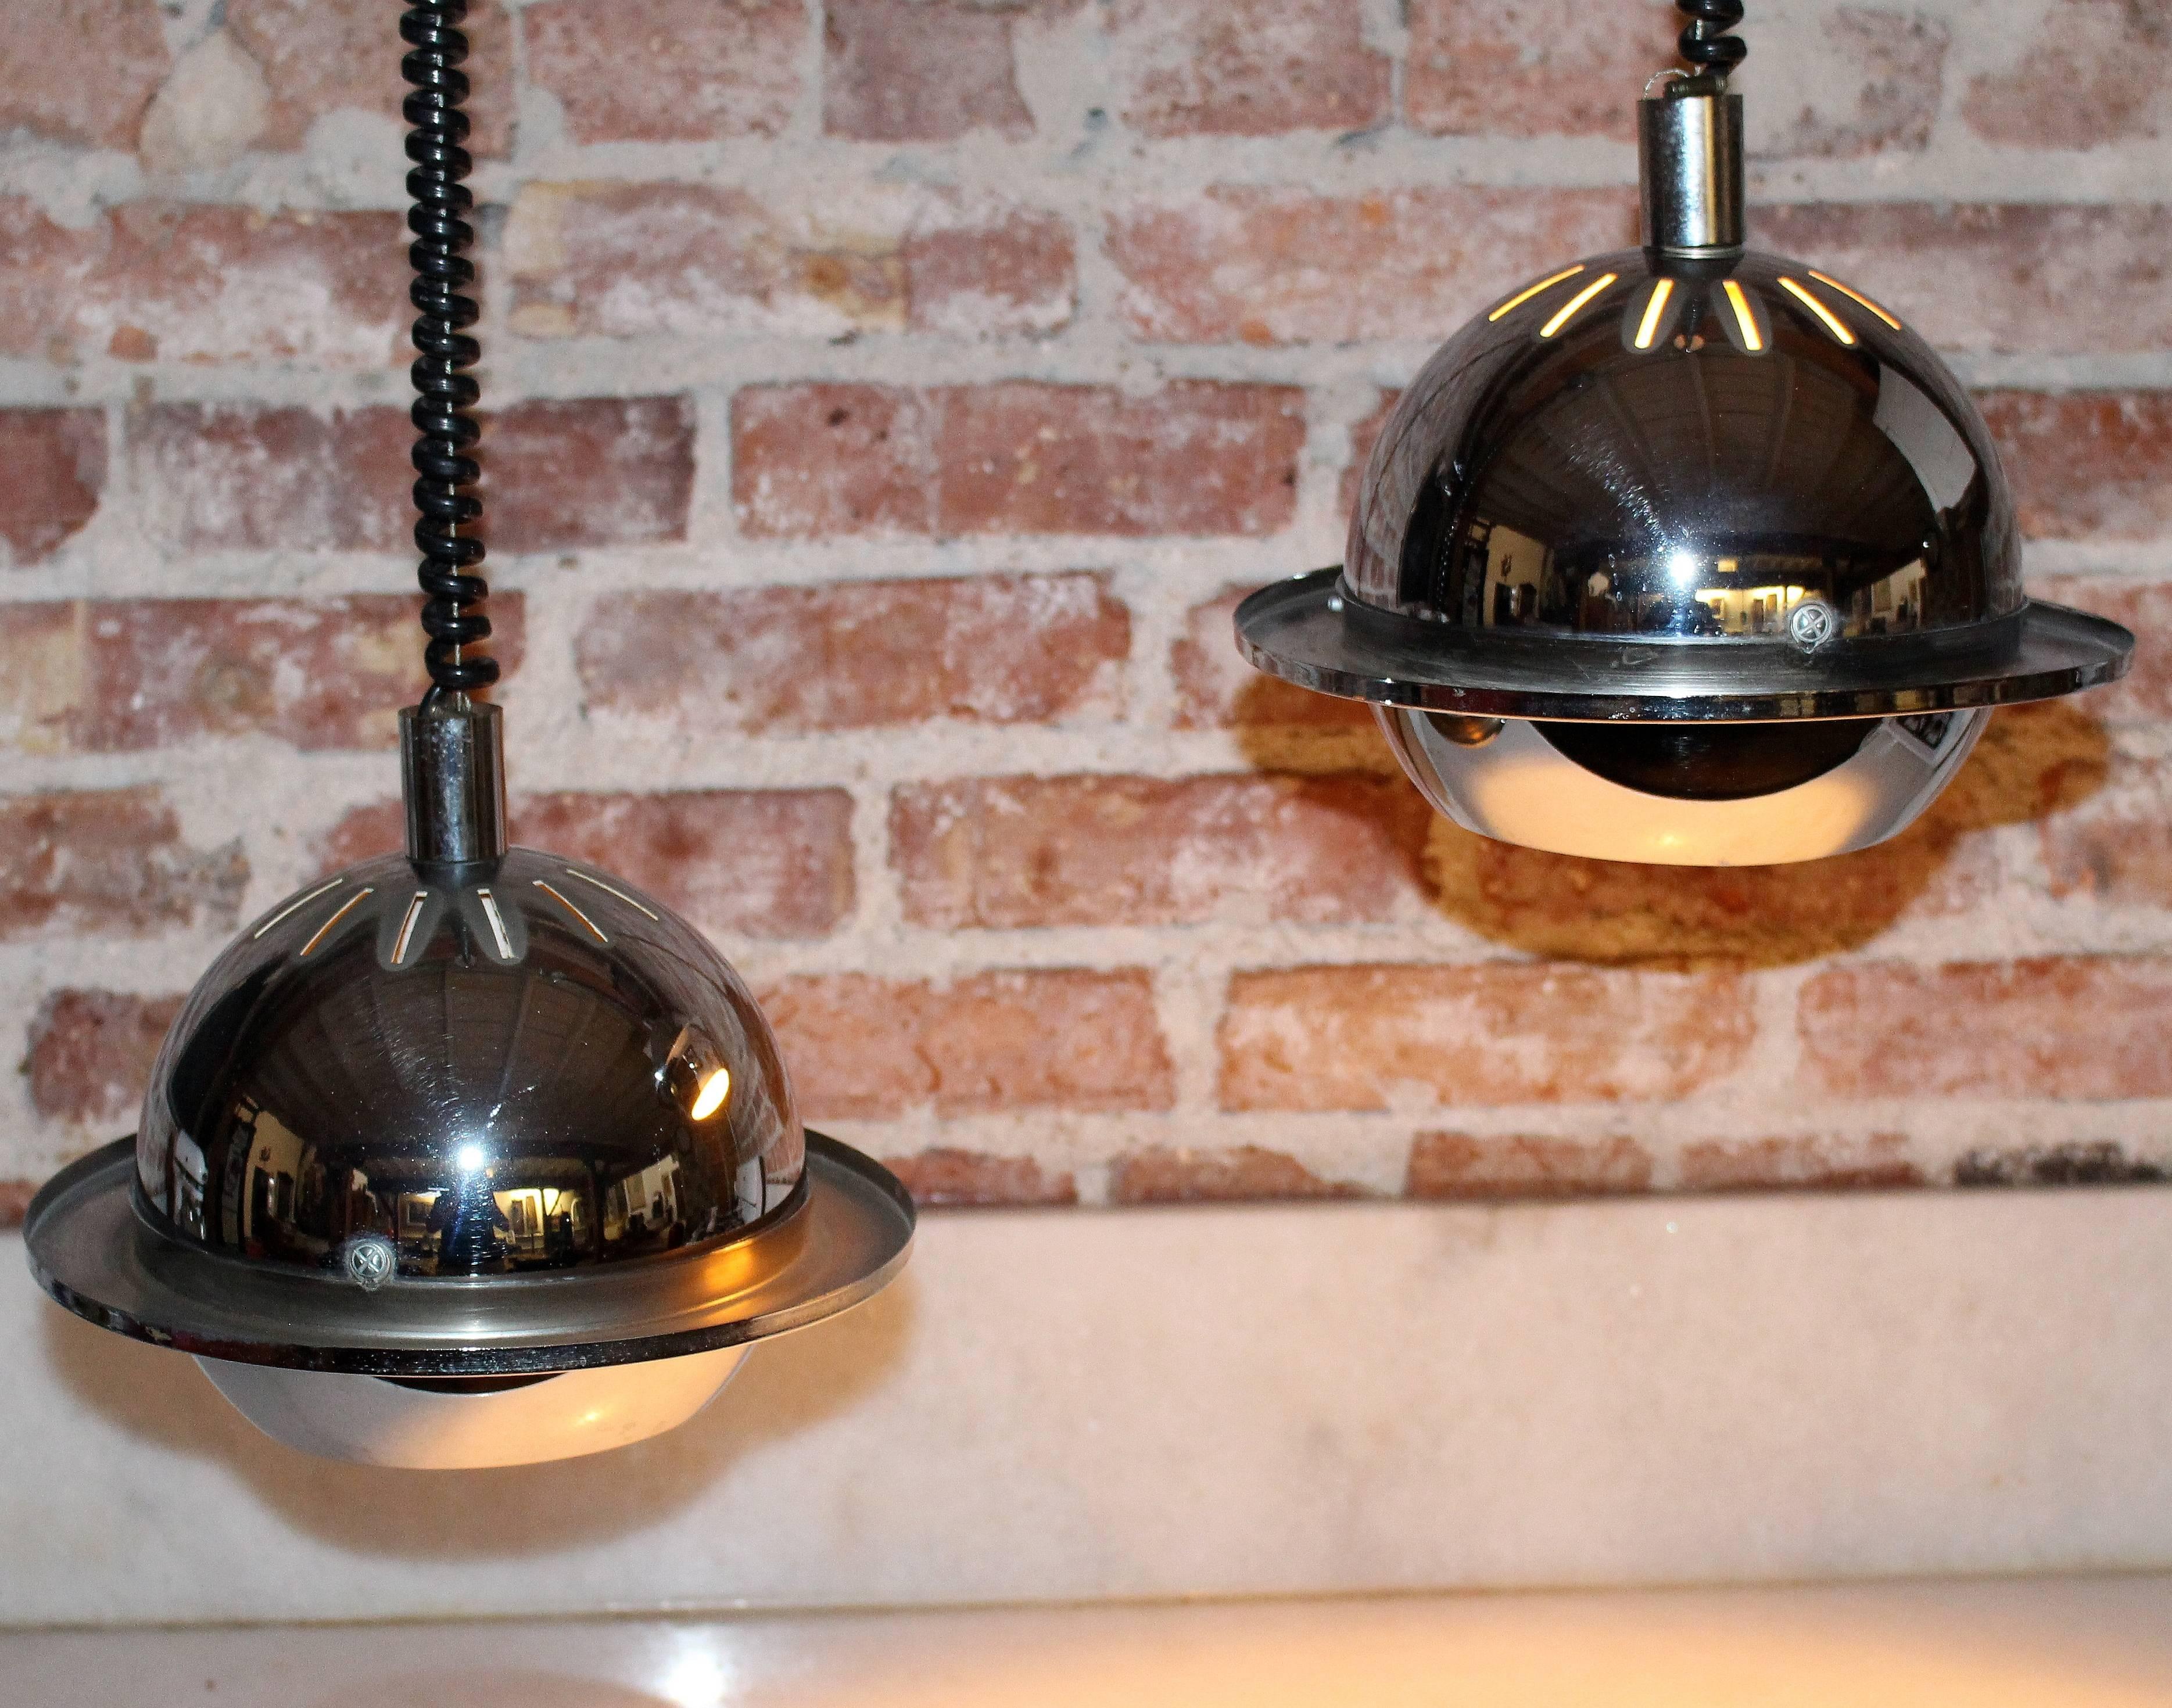 Pair of chrome globe Italian pendants .Adjustable height extended drop is 40 inches .Italian par of pendants in style of Reggiani.